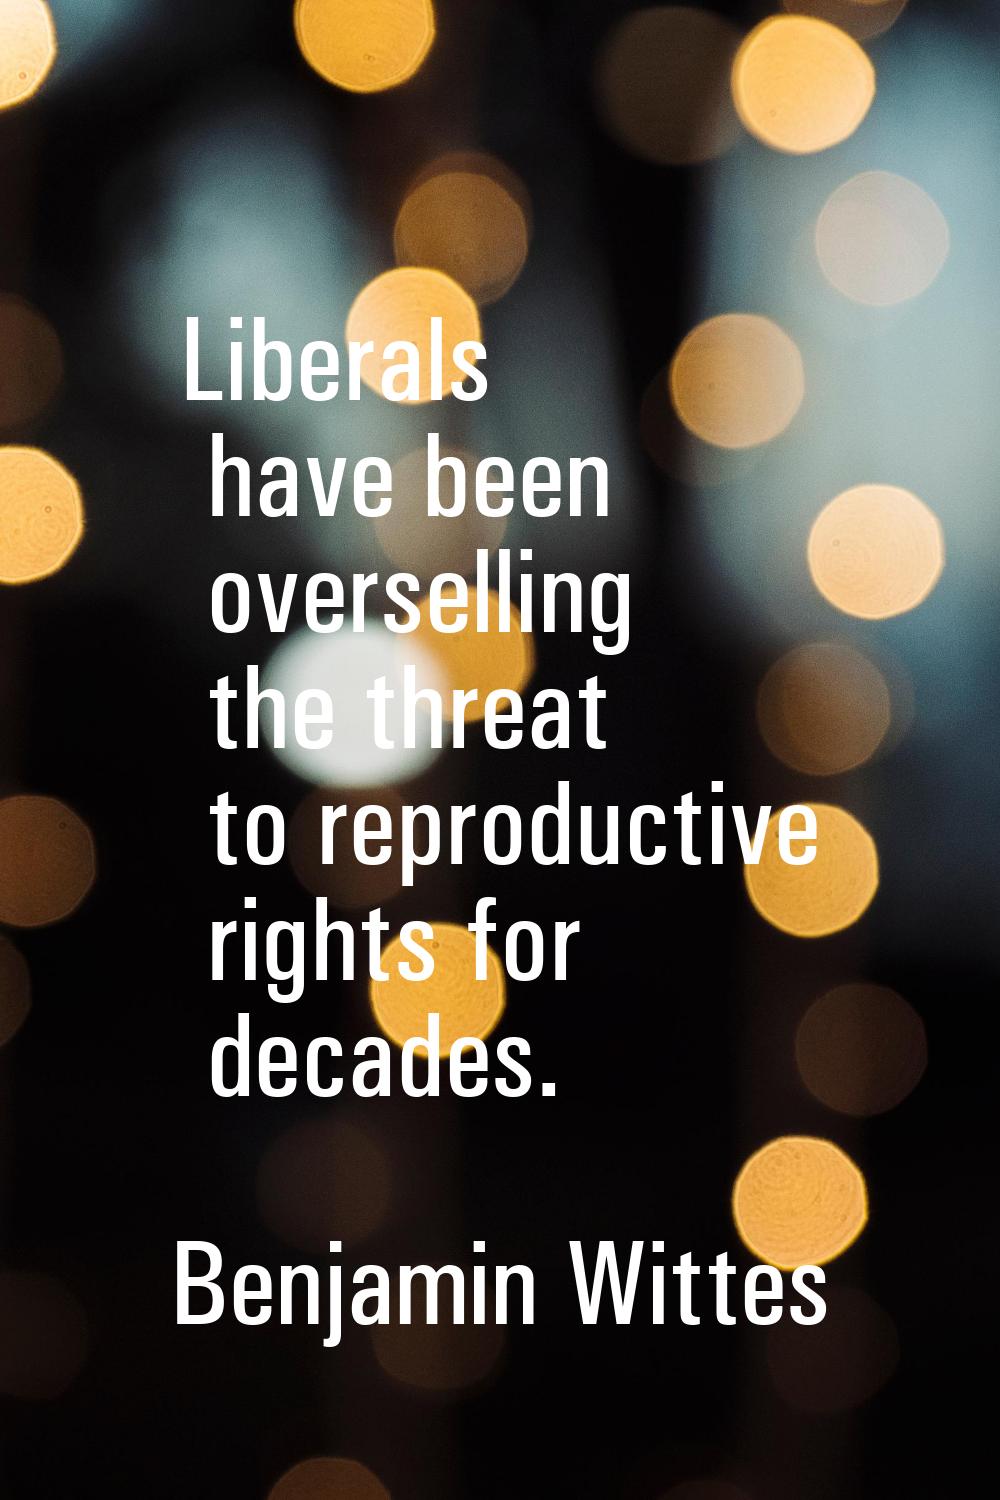 Liberals have been overselling the threat to reproductive rights for decades.